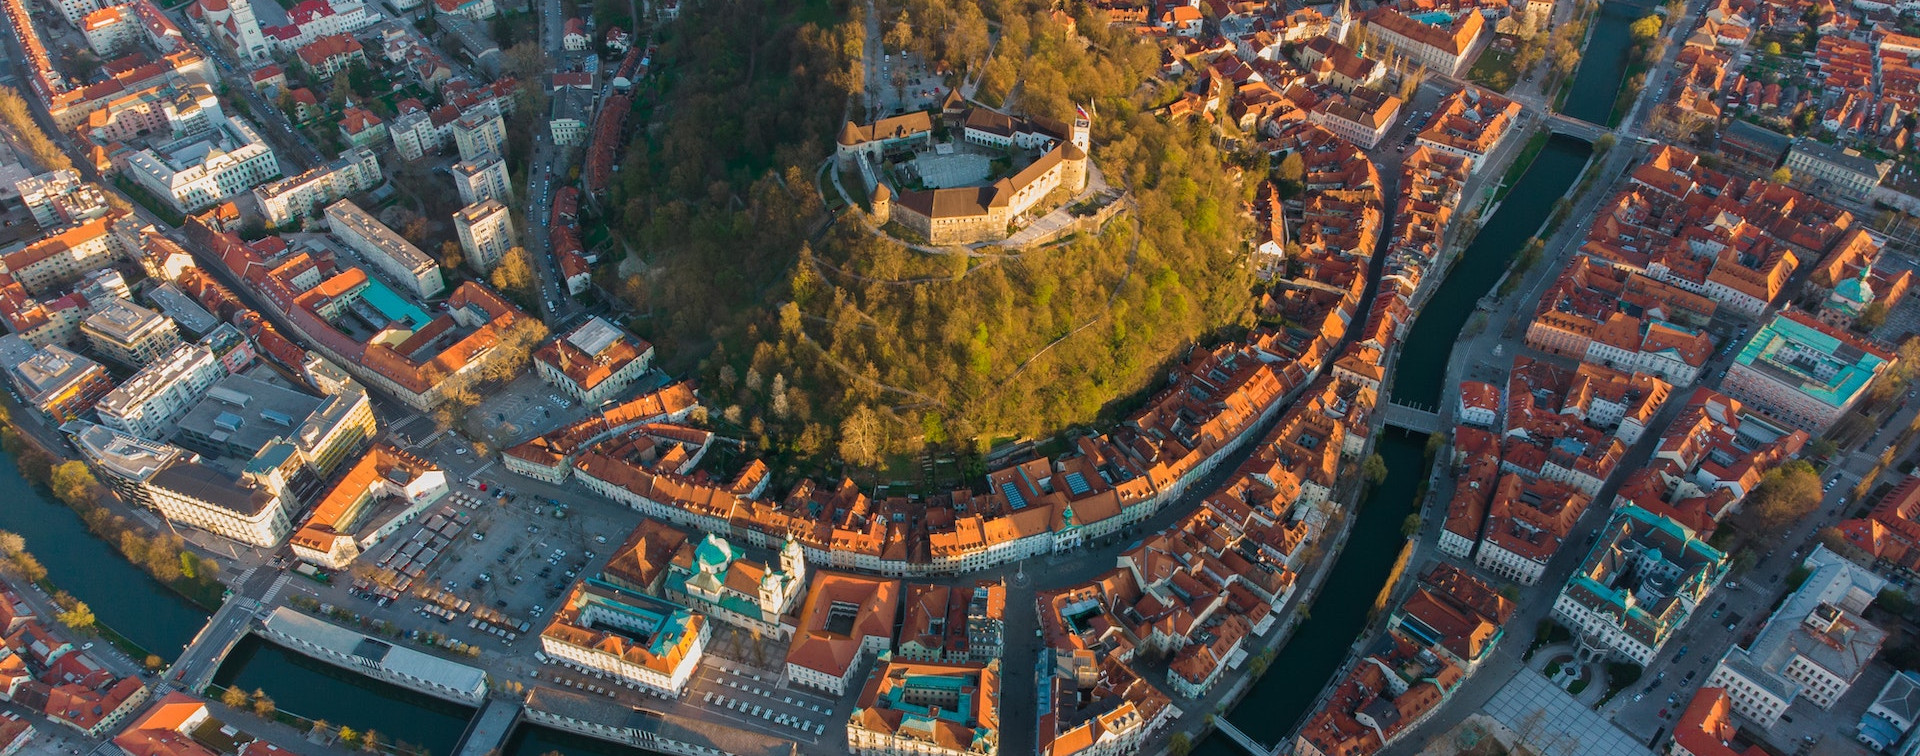 DLM Forum Members' Meeting in Ljubljana, 10-11 May 2023: The call for papers is open until April 7